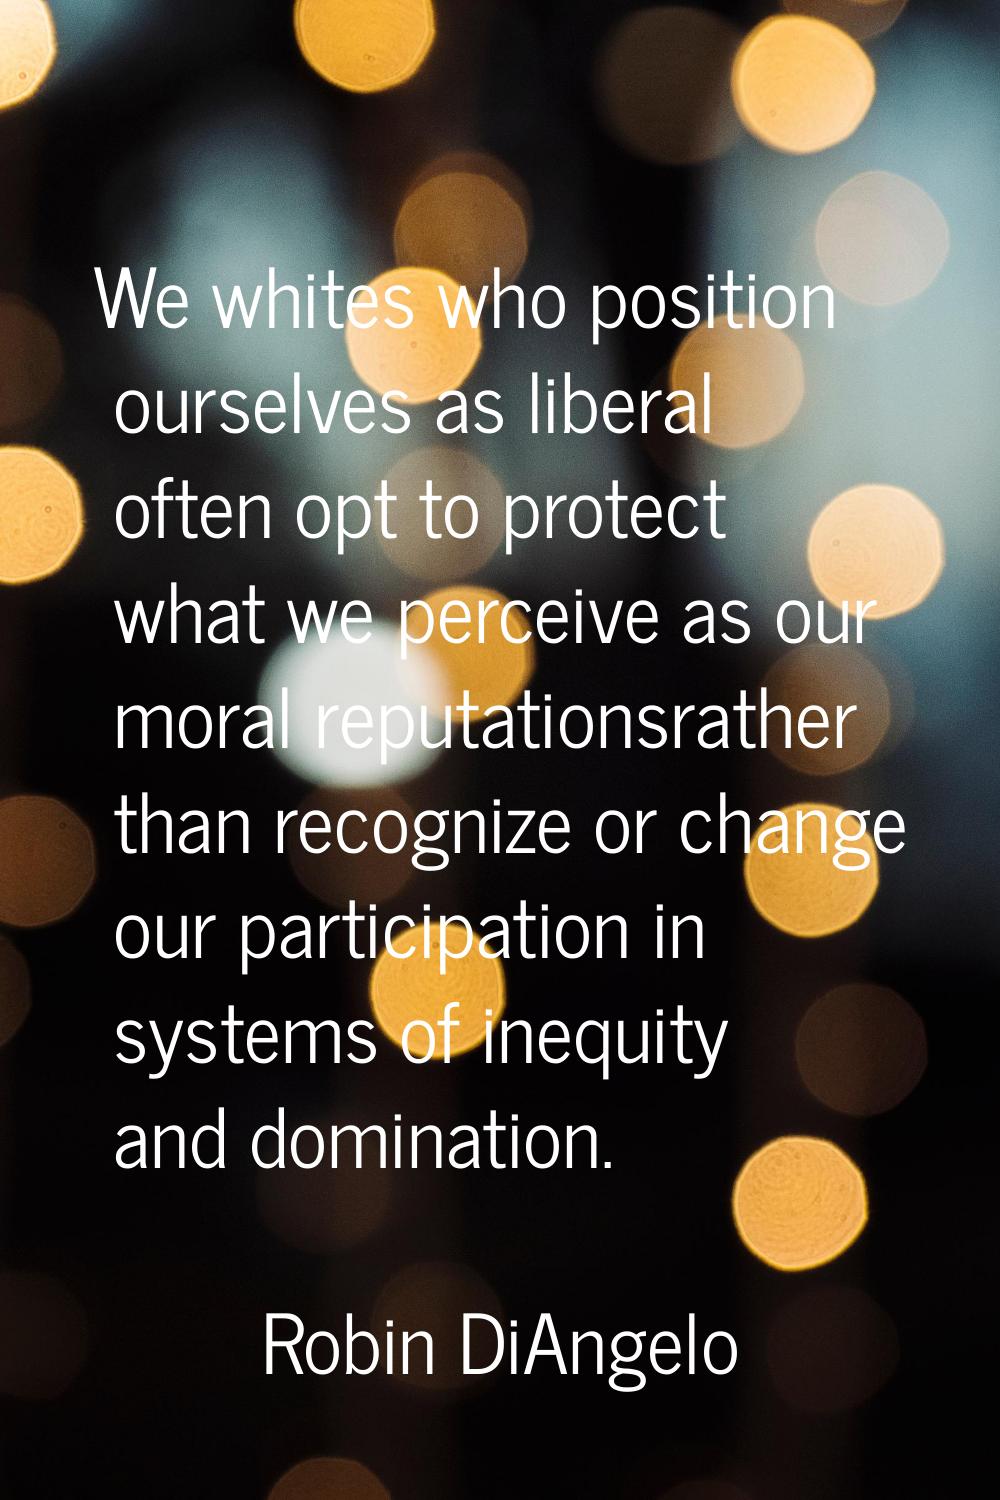 We whites who position ourselves as liberal often opt to protect what we perceive as our moral repu